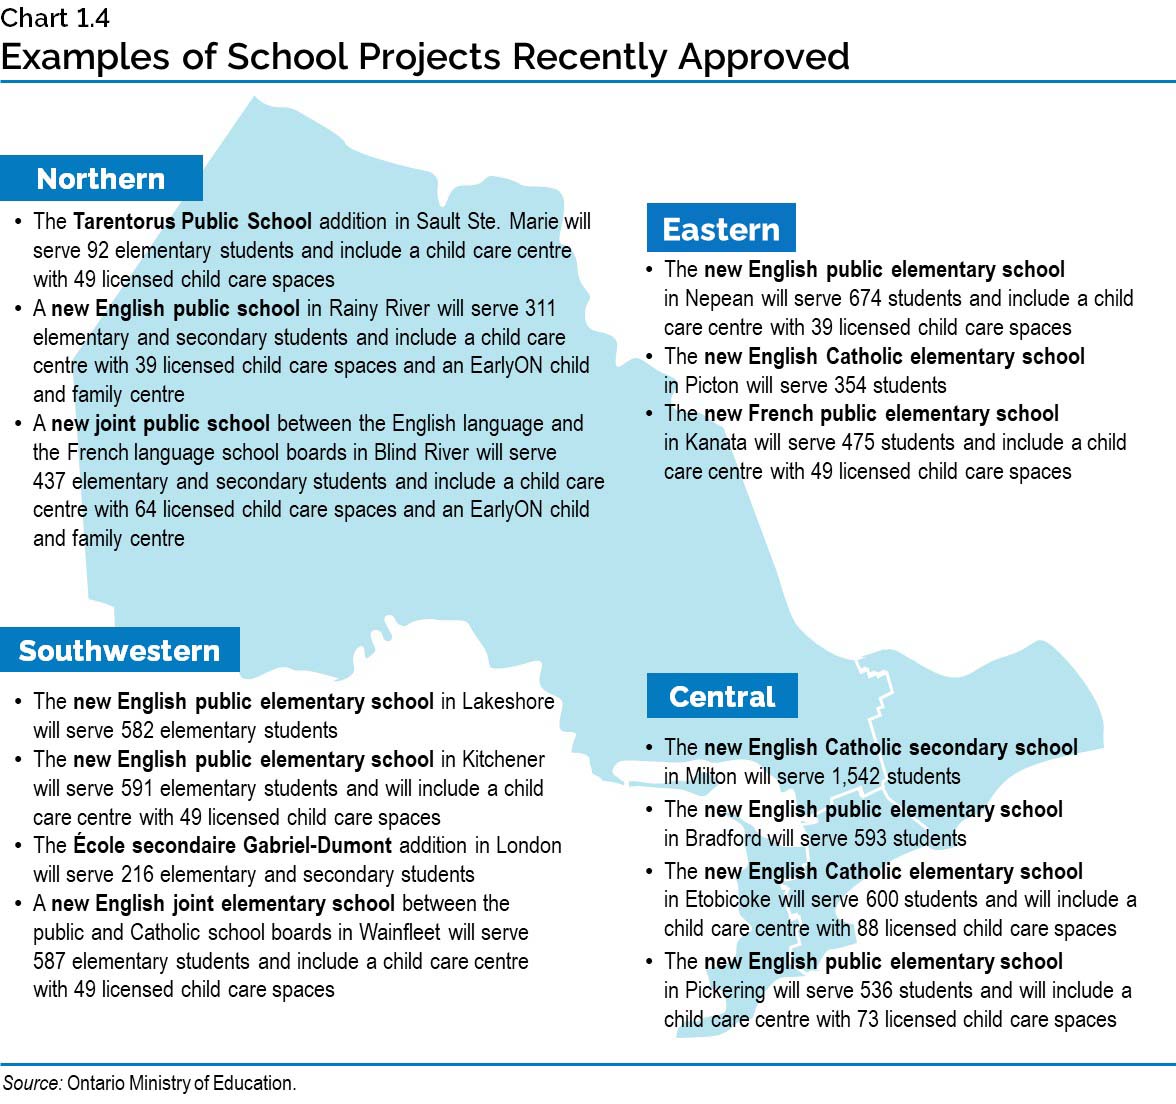 Chart 1.4: Examples of School Projects Recently Approved